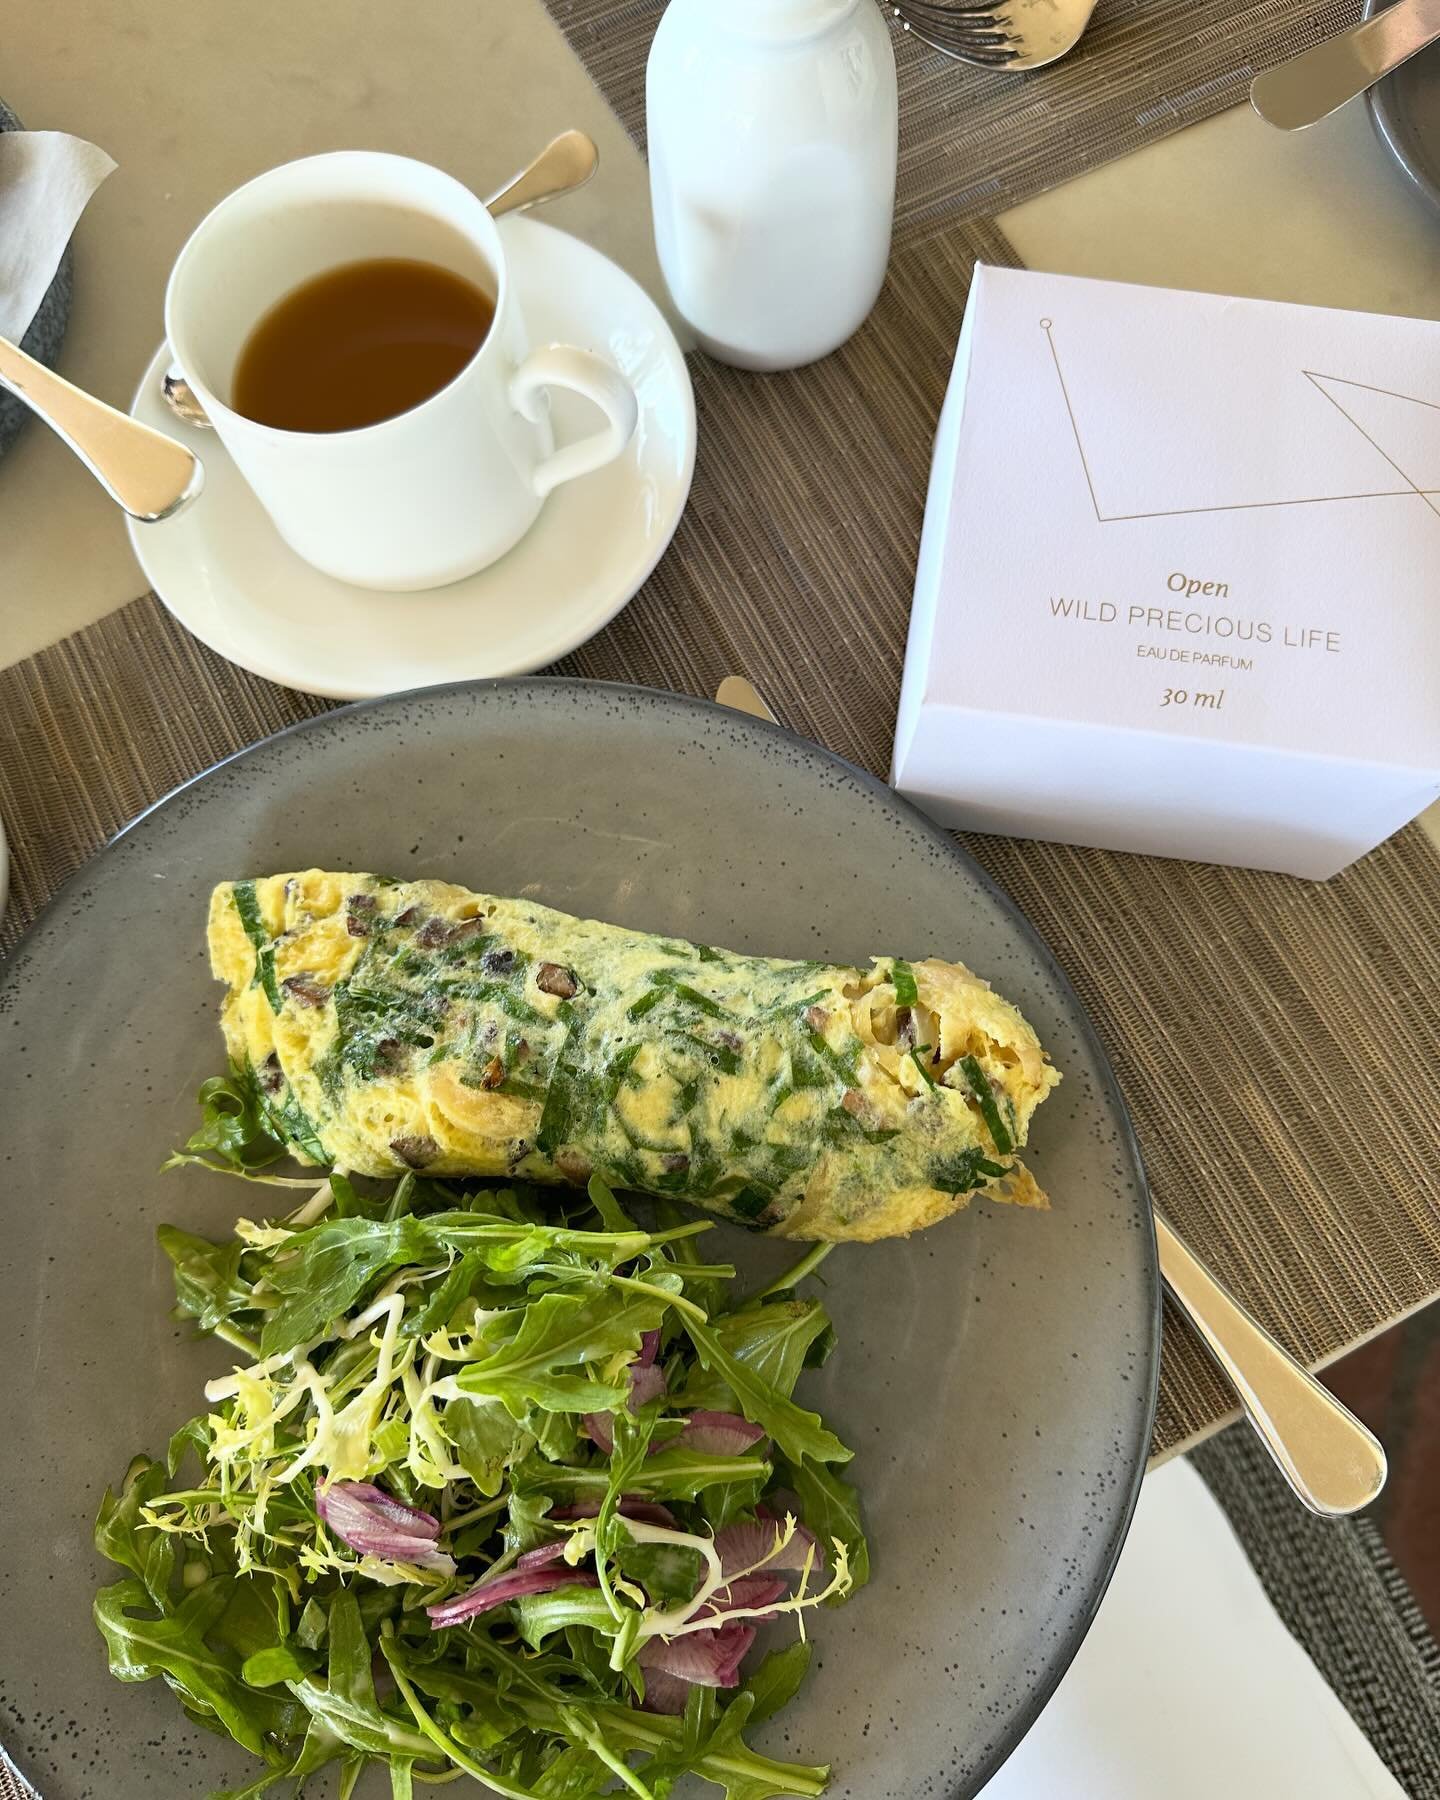 How we start our day- eggs and greens, coffee and a spritz of our essential oil based perfumes! This morning was extra special as we pow wowed with friend and sales mastermind @11thandgray @belmondelencanto. Stay tuned for some@magic we dreamed up&he